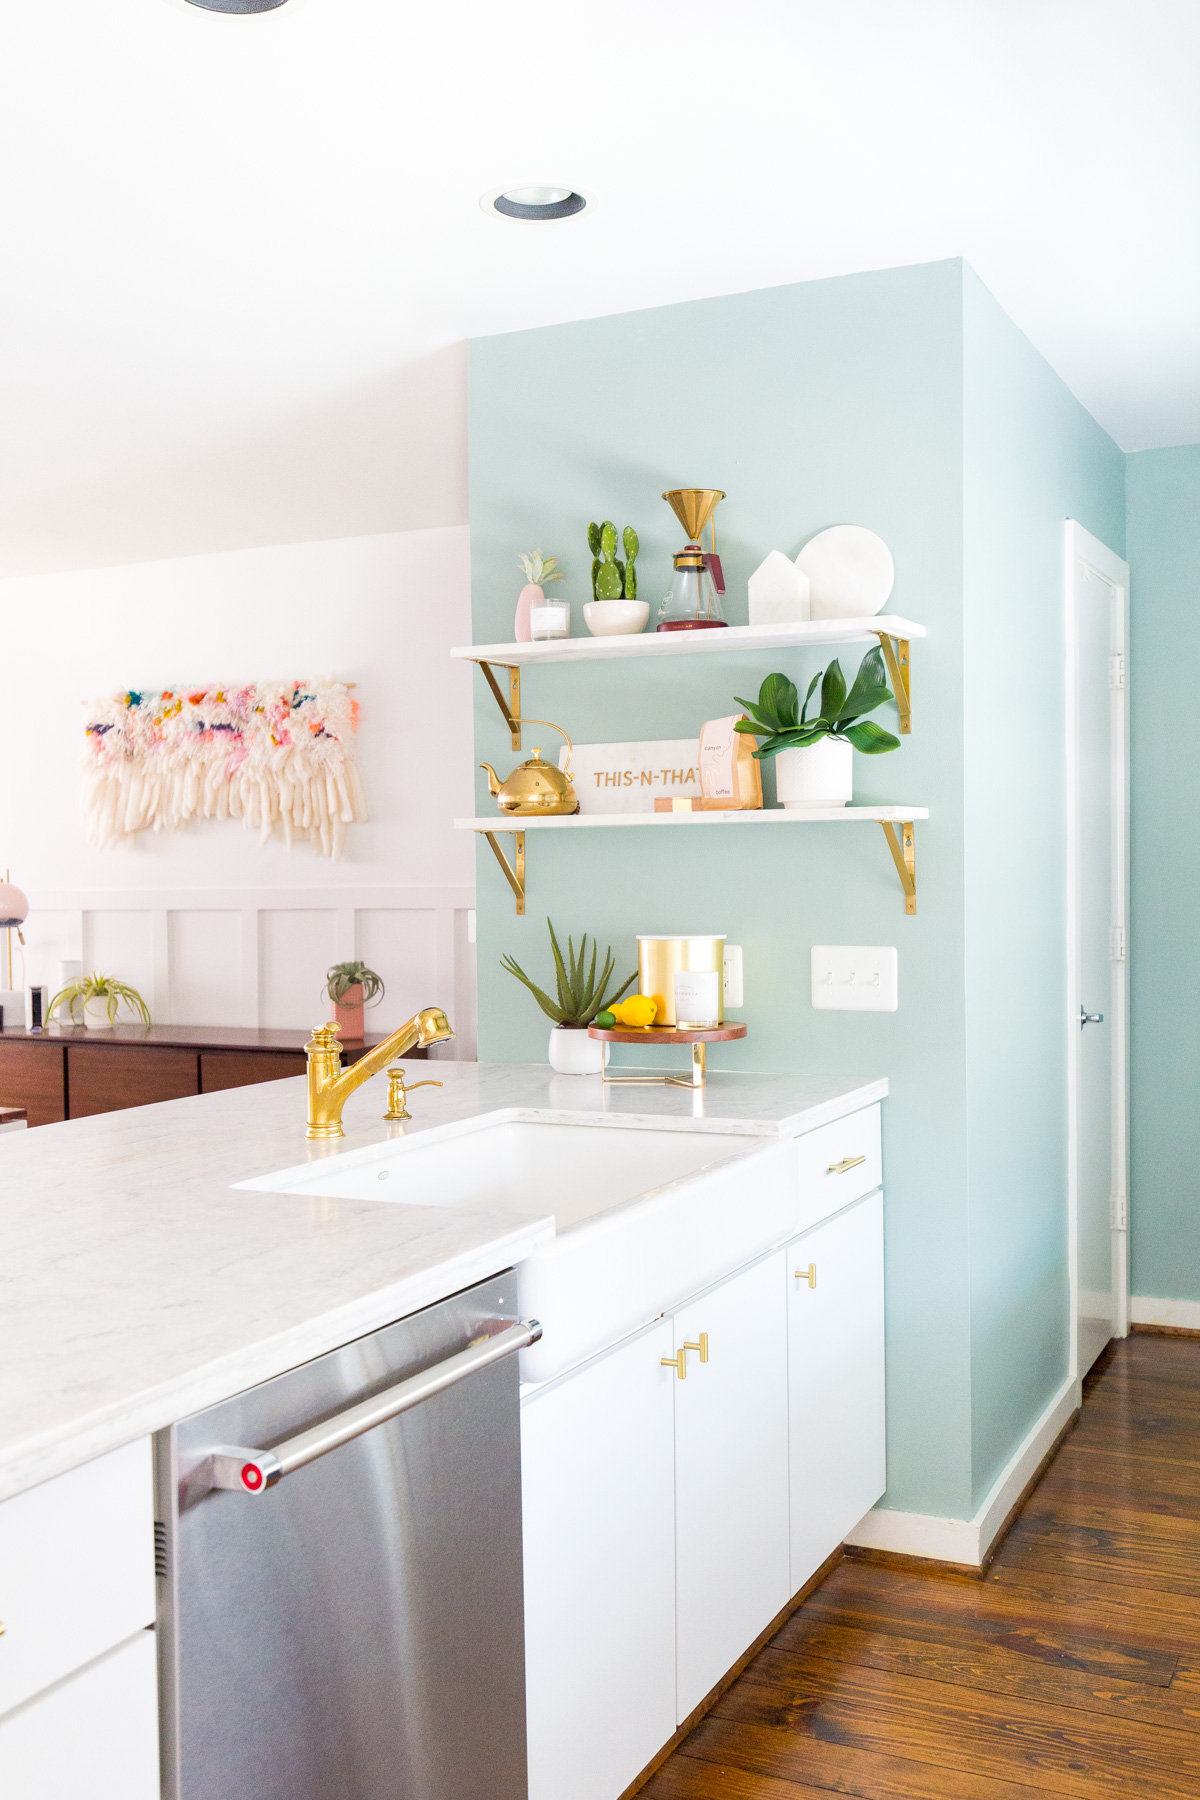 Kitchen Decorating Ideas: Kitchen Accent Wall / A simple way to make your space stand out is to grab the paint brush! Transform an accent wall with fresh color to instantly bring in a little character. Go bright and bold or saturated and subtle with your hue selection. Either way, this pop of color will set the tone for the rest of your room / theanastasiaco.com